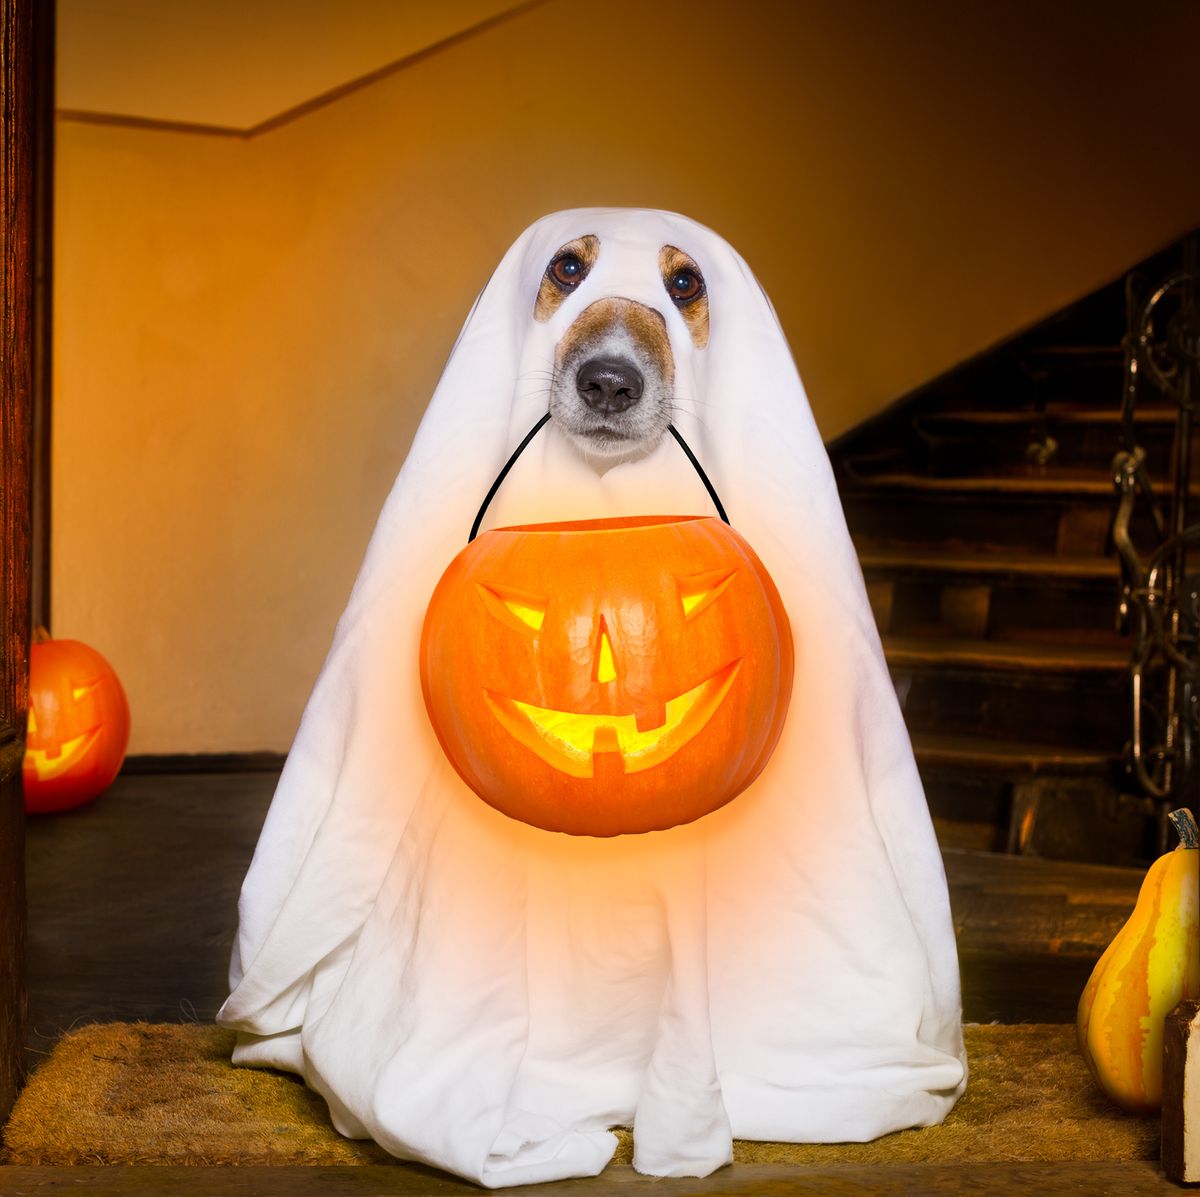 50 Best Ghost Jokes - Funny Ghost One-Liners for Kids and Adults